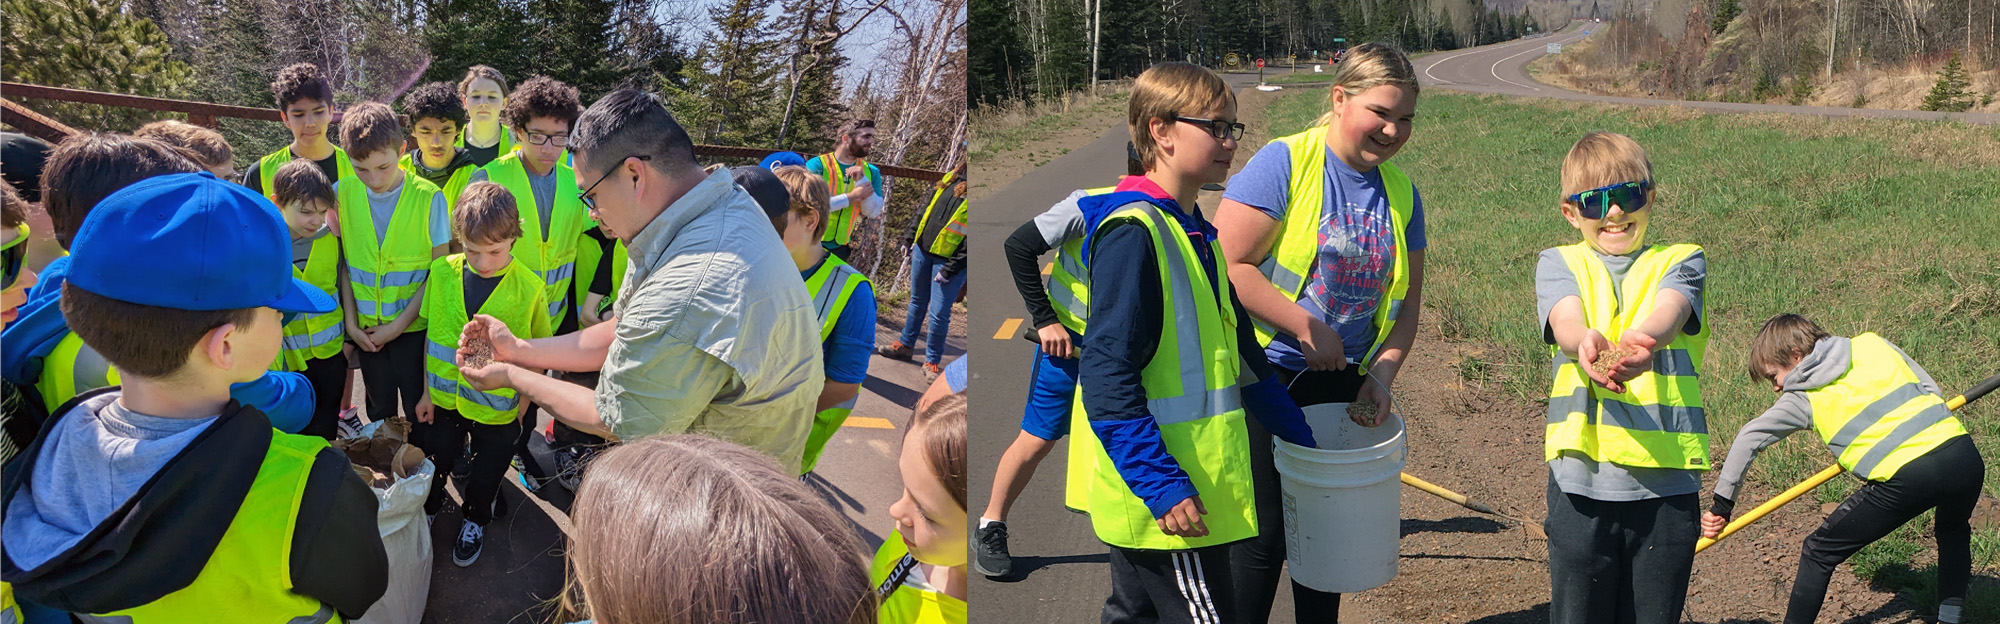 Elementary students in yellow safety vests on a trail